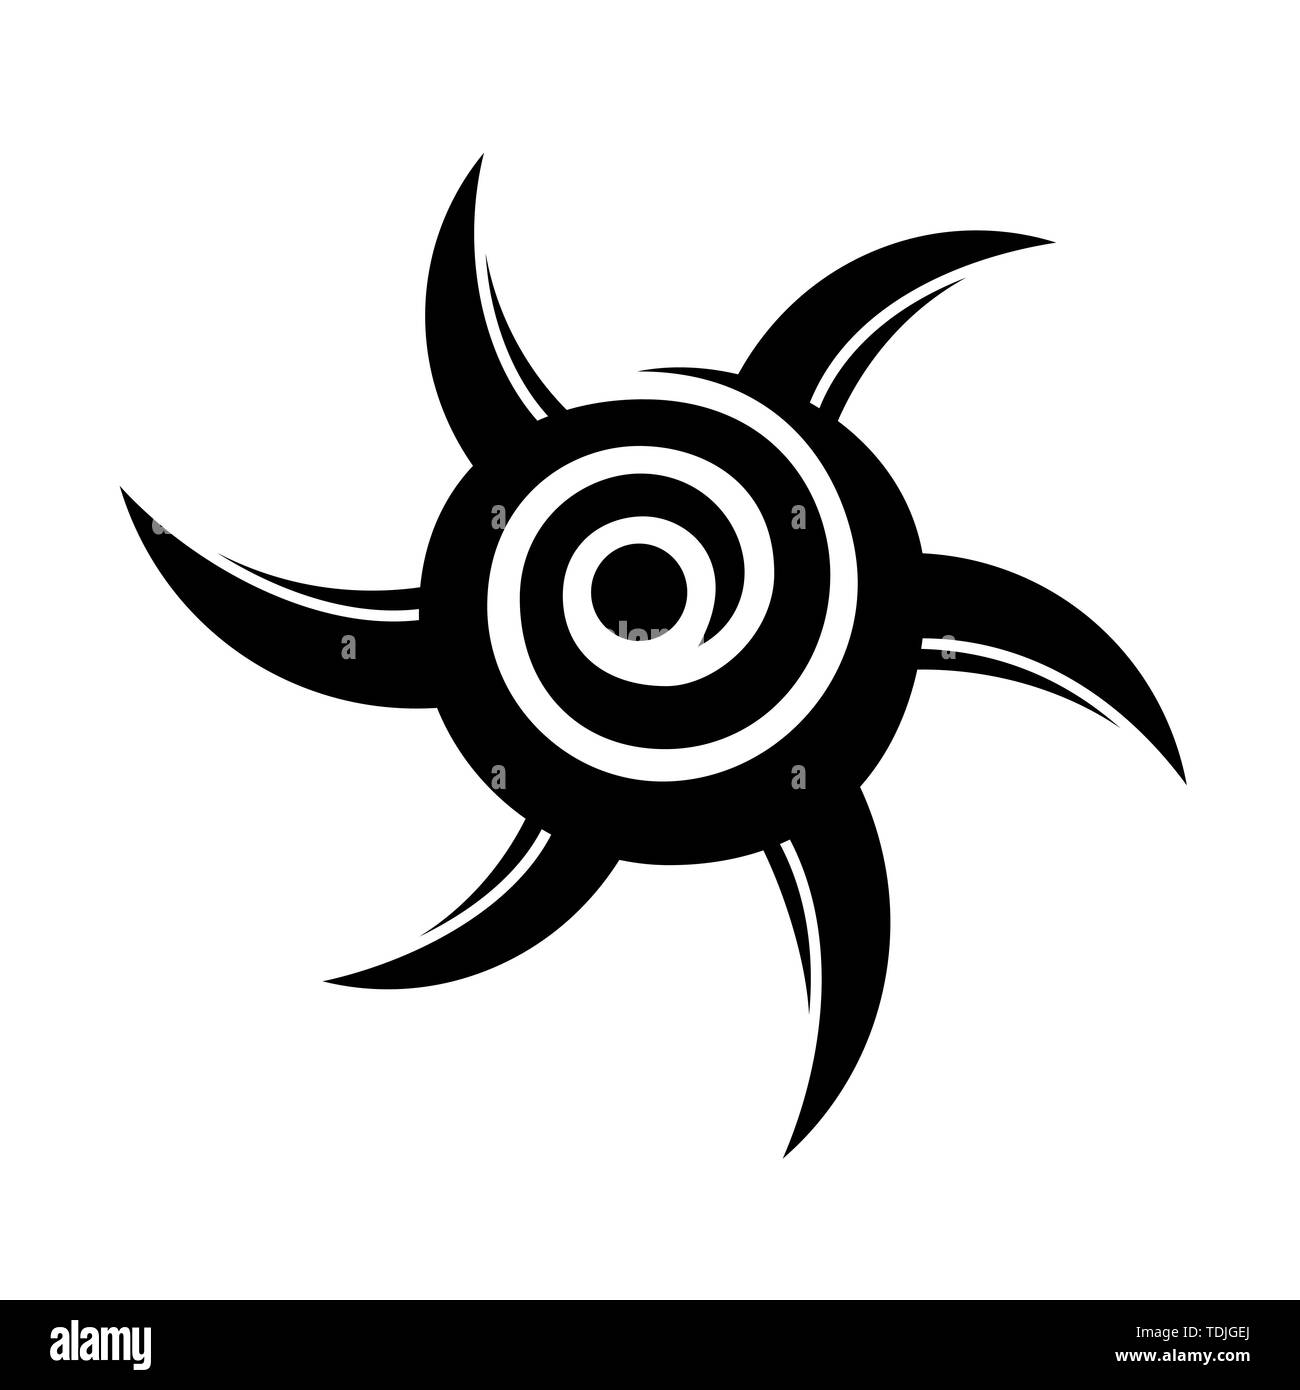 Abstract geometric ethnic symbol, isolated on white background, spiral. Geometric logo, sign. Tattoo design in the form of the sun. Vector monochrome. Stock Vector